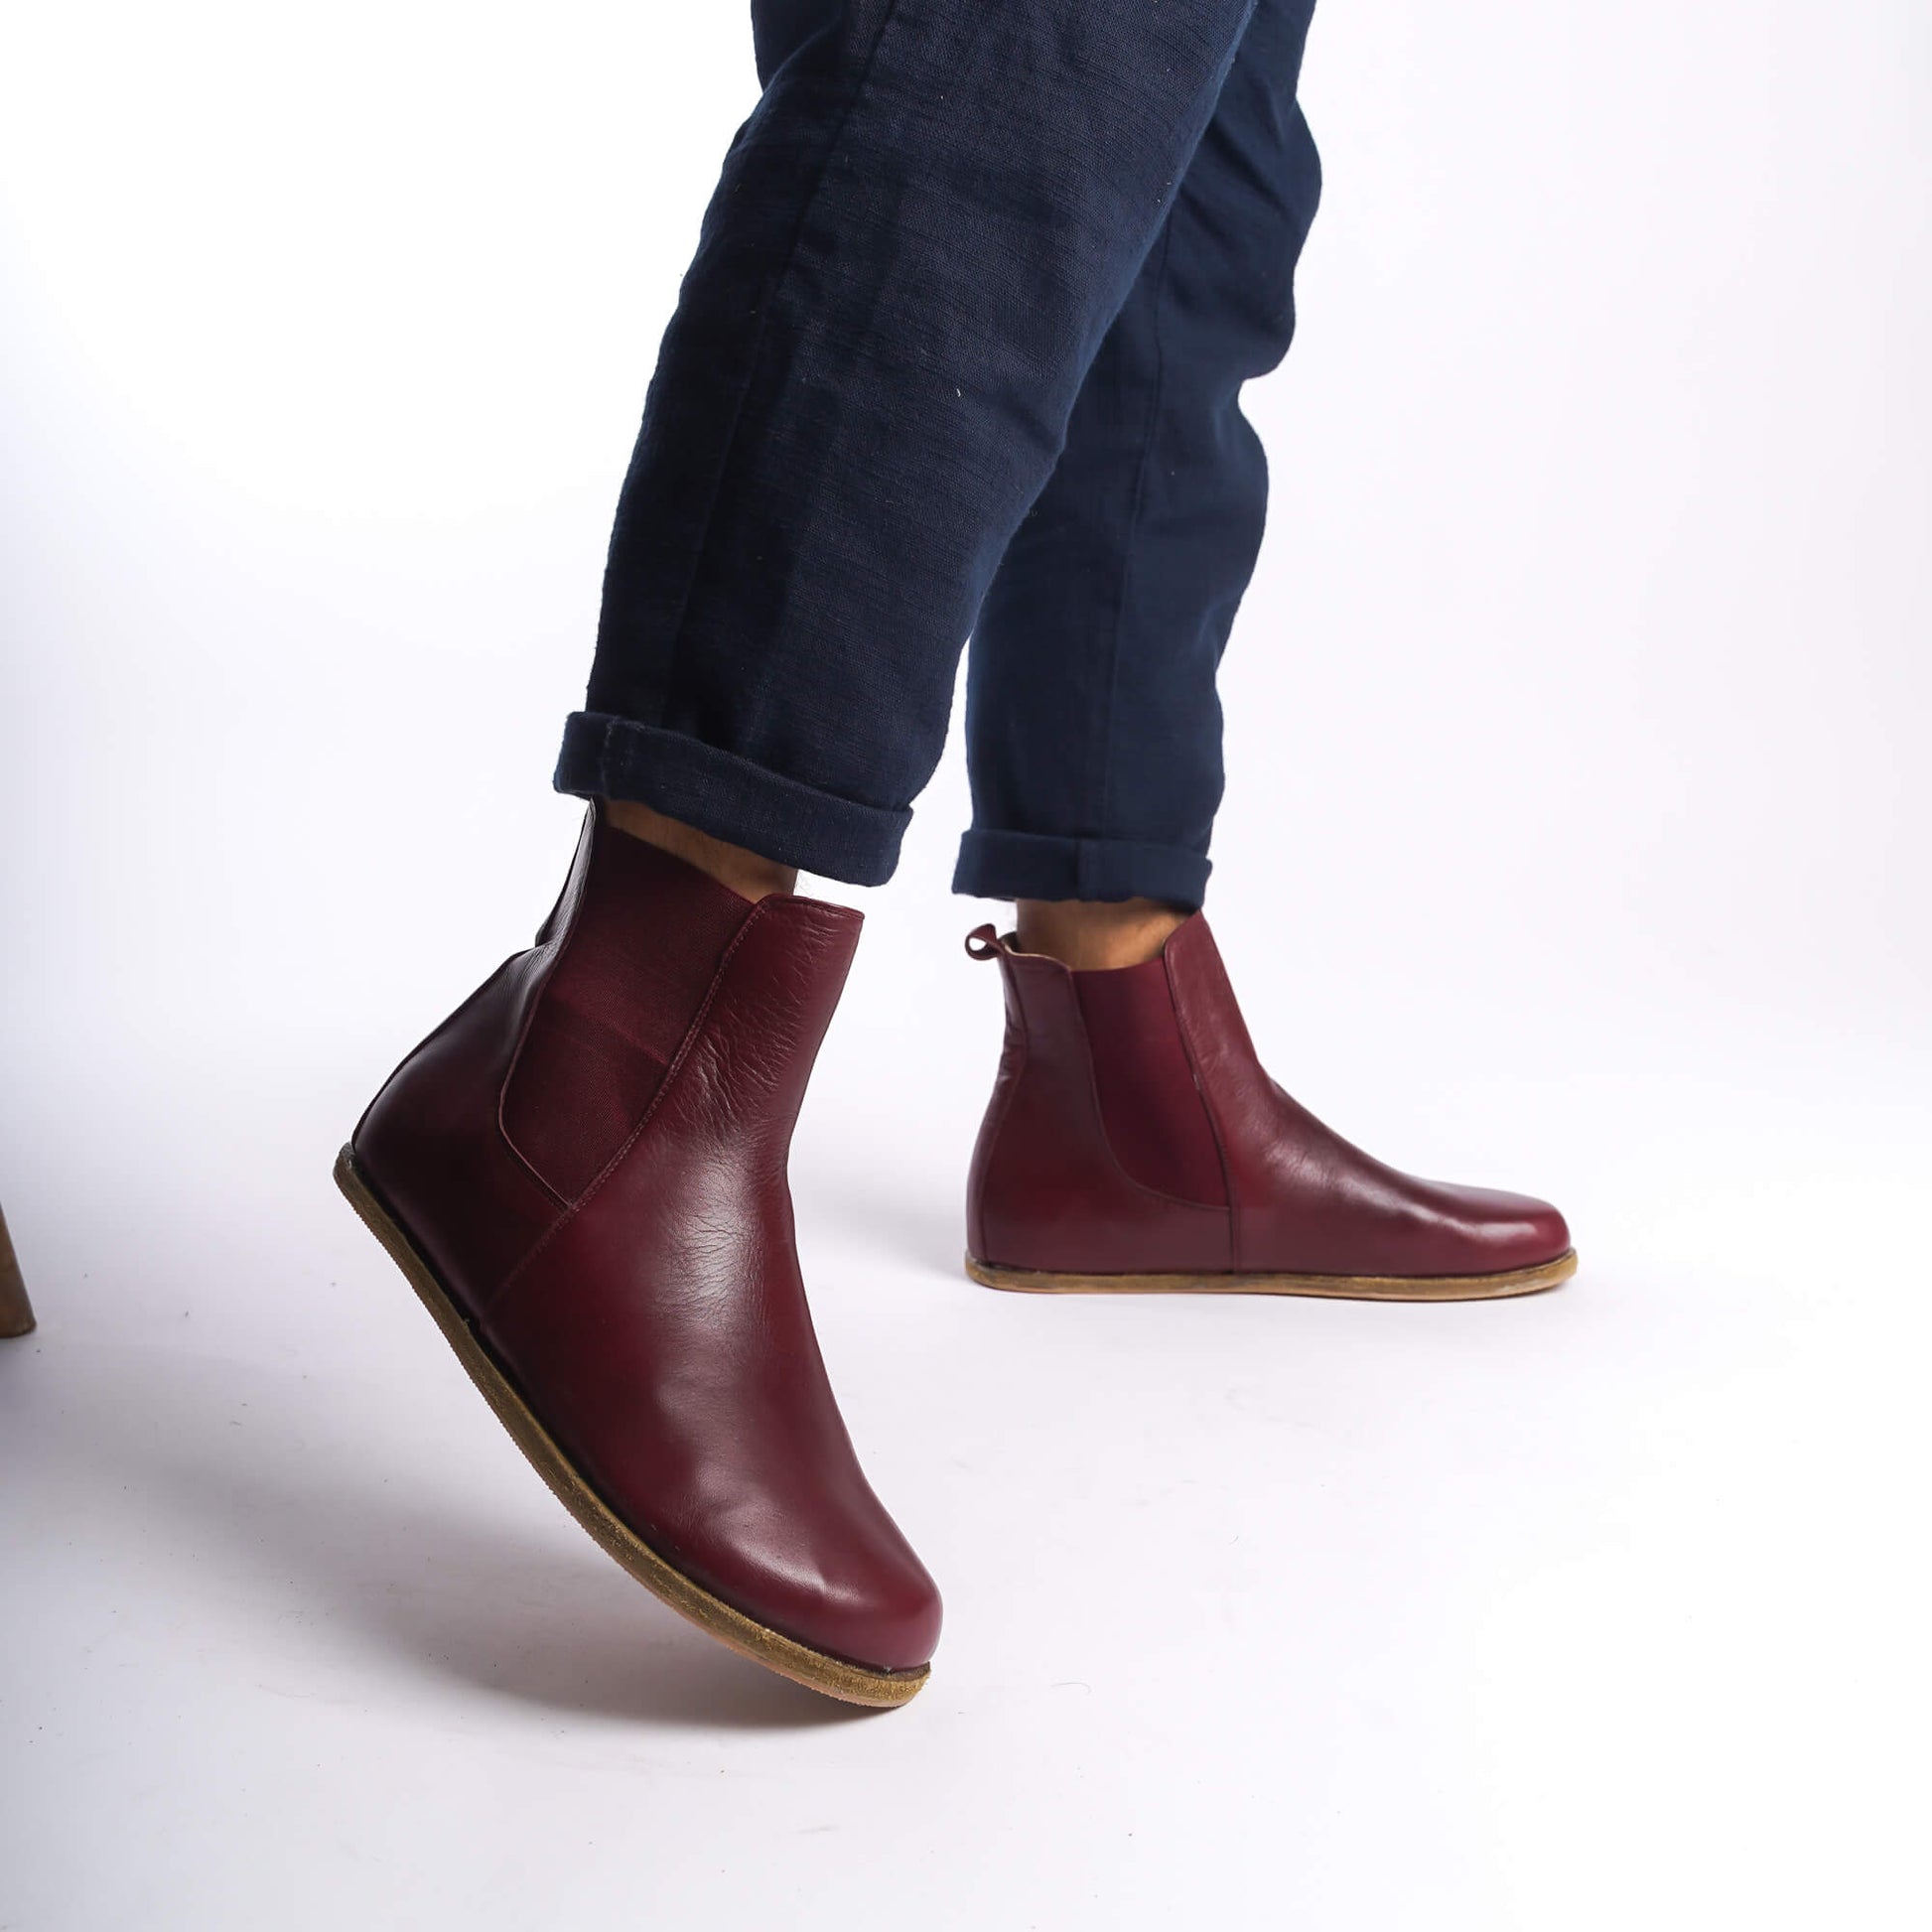 Side view of men's burgundy Chelsea boots, showcasing the minimalist design and rich leather material.